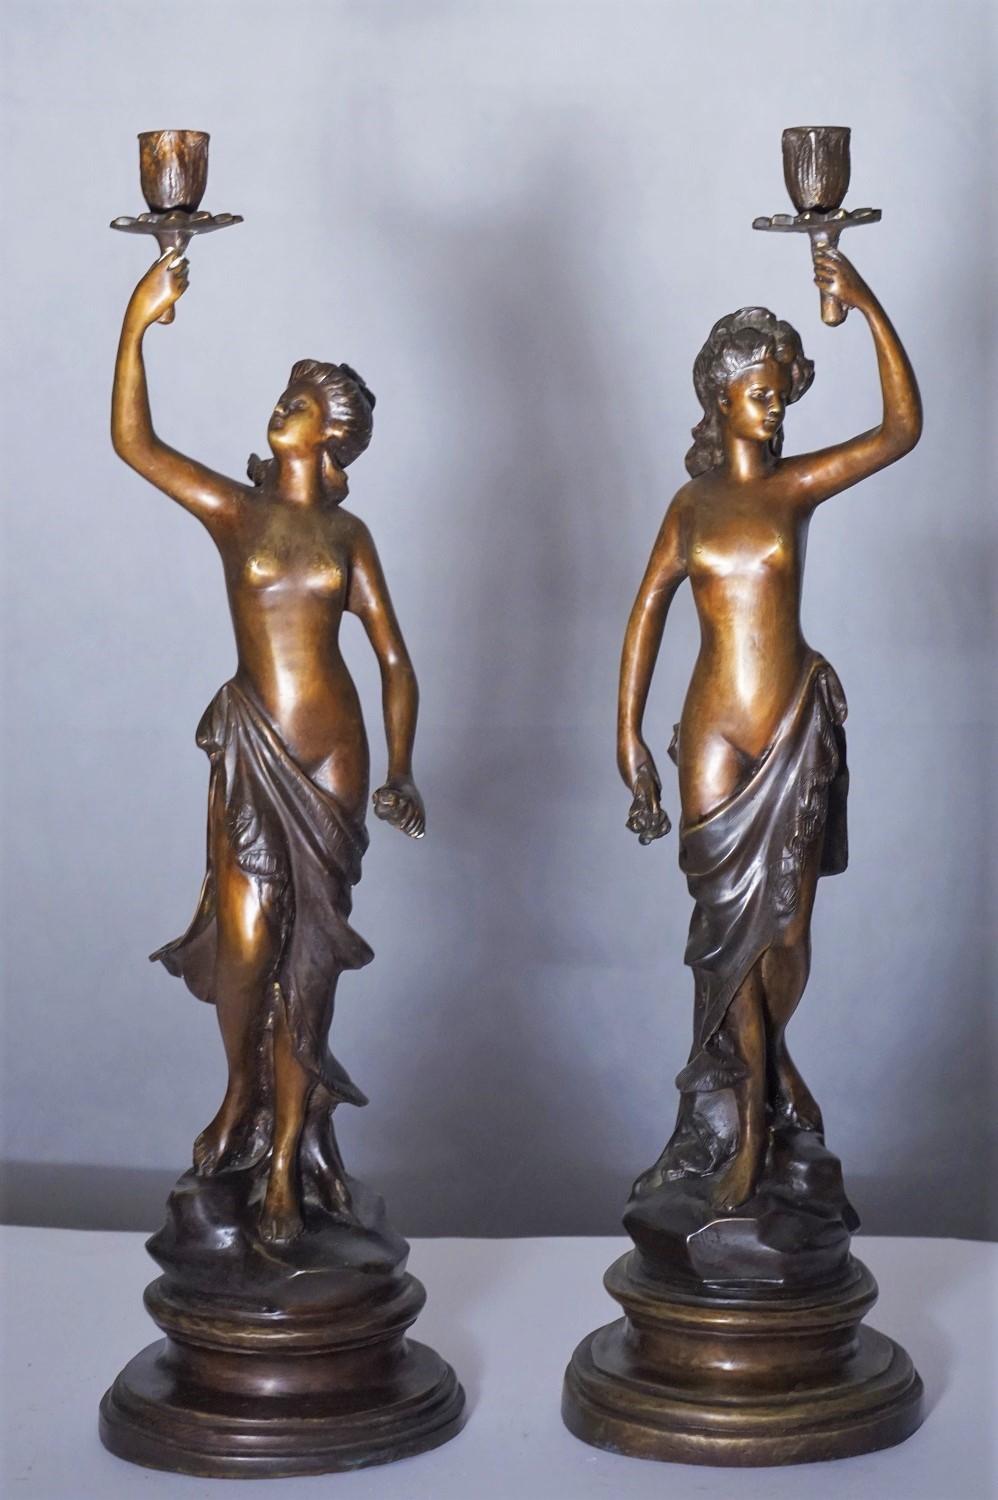 A pair of heavy patinated bronze sculpture candelabra, France, mid-19th century. Two female sculptures holding a candleholder raised on a bronze circular base, signed by the artist.
Measures:
Height 21 in / 54 cm
Base diameter 6 in / 15 cm.